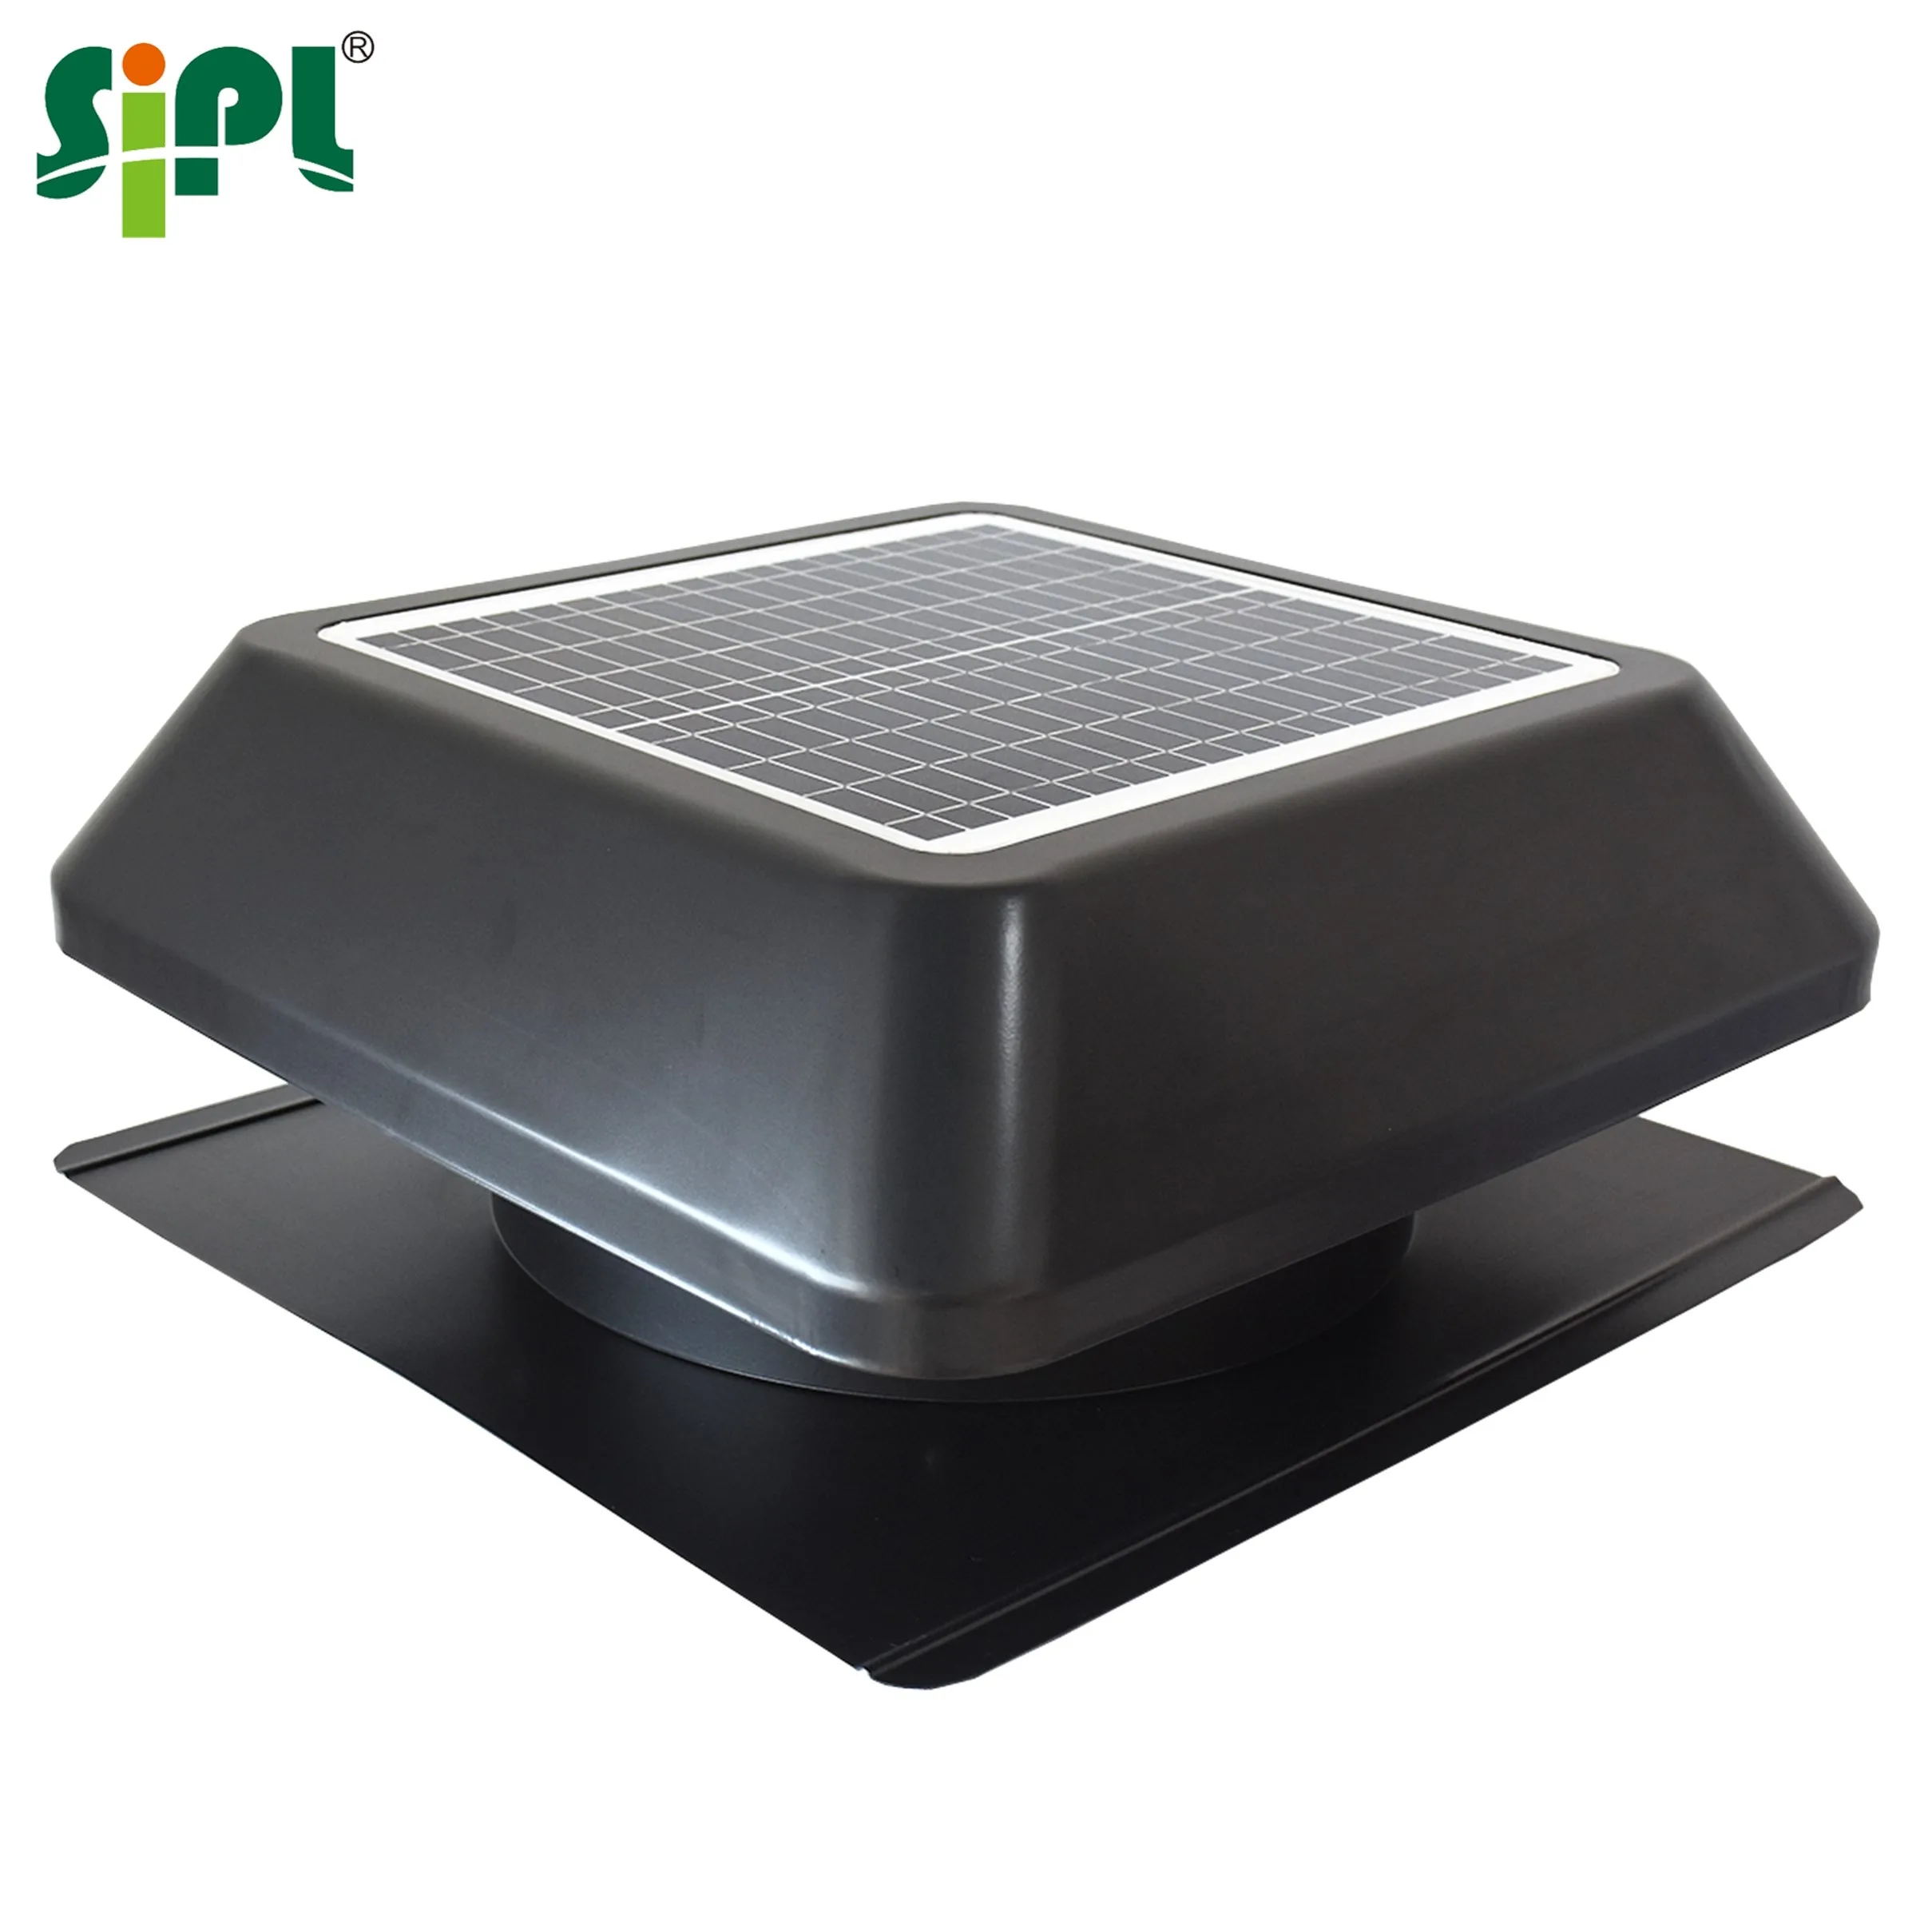 Roof Top Tunnel Green Air Vent High Speed Ceiling Ventilation Solar Powered Attic Heat Extractor Fan 14' DC Air Circulator Fan